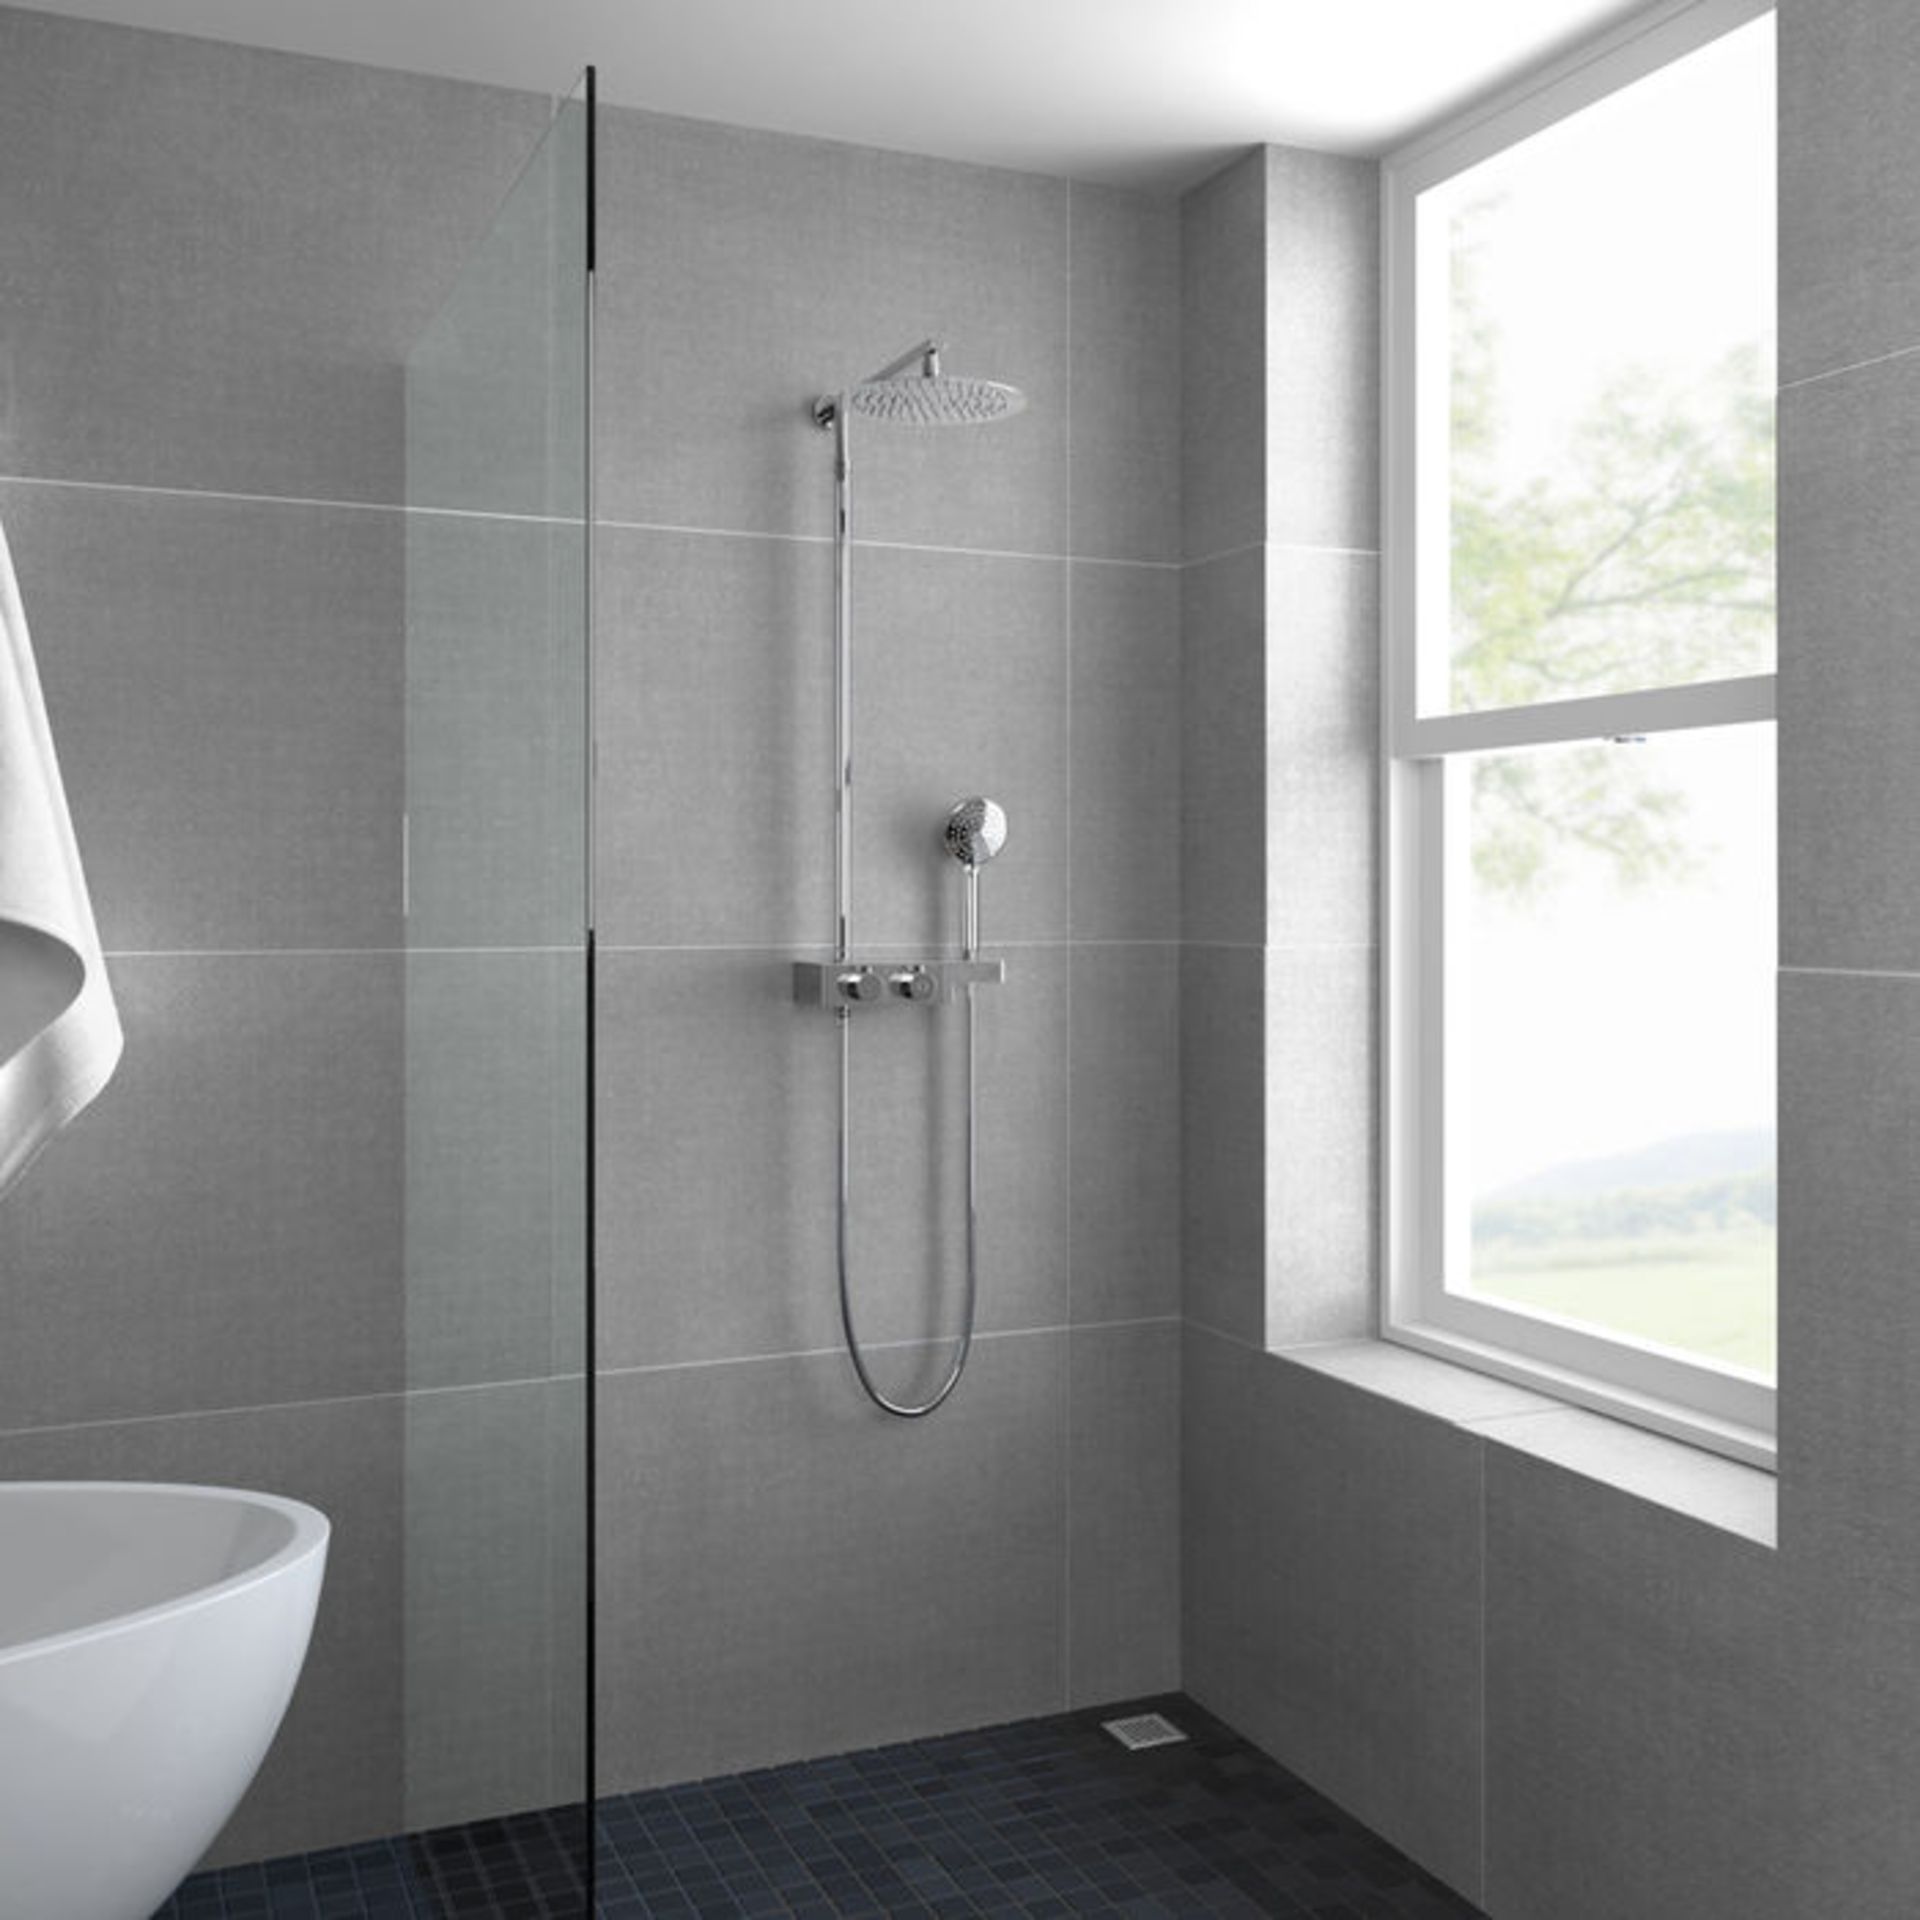 (ZL208) Round Exposed Thermostatic Mixer Shower Kit & Large Head. RRP £349.99. Cool to touch - Image 4 of 4